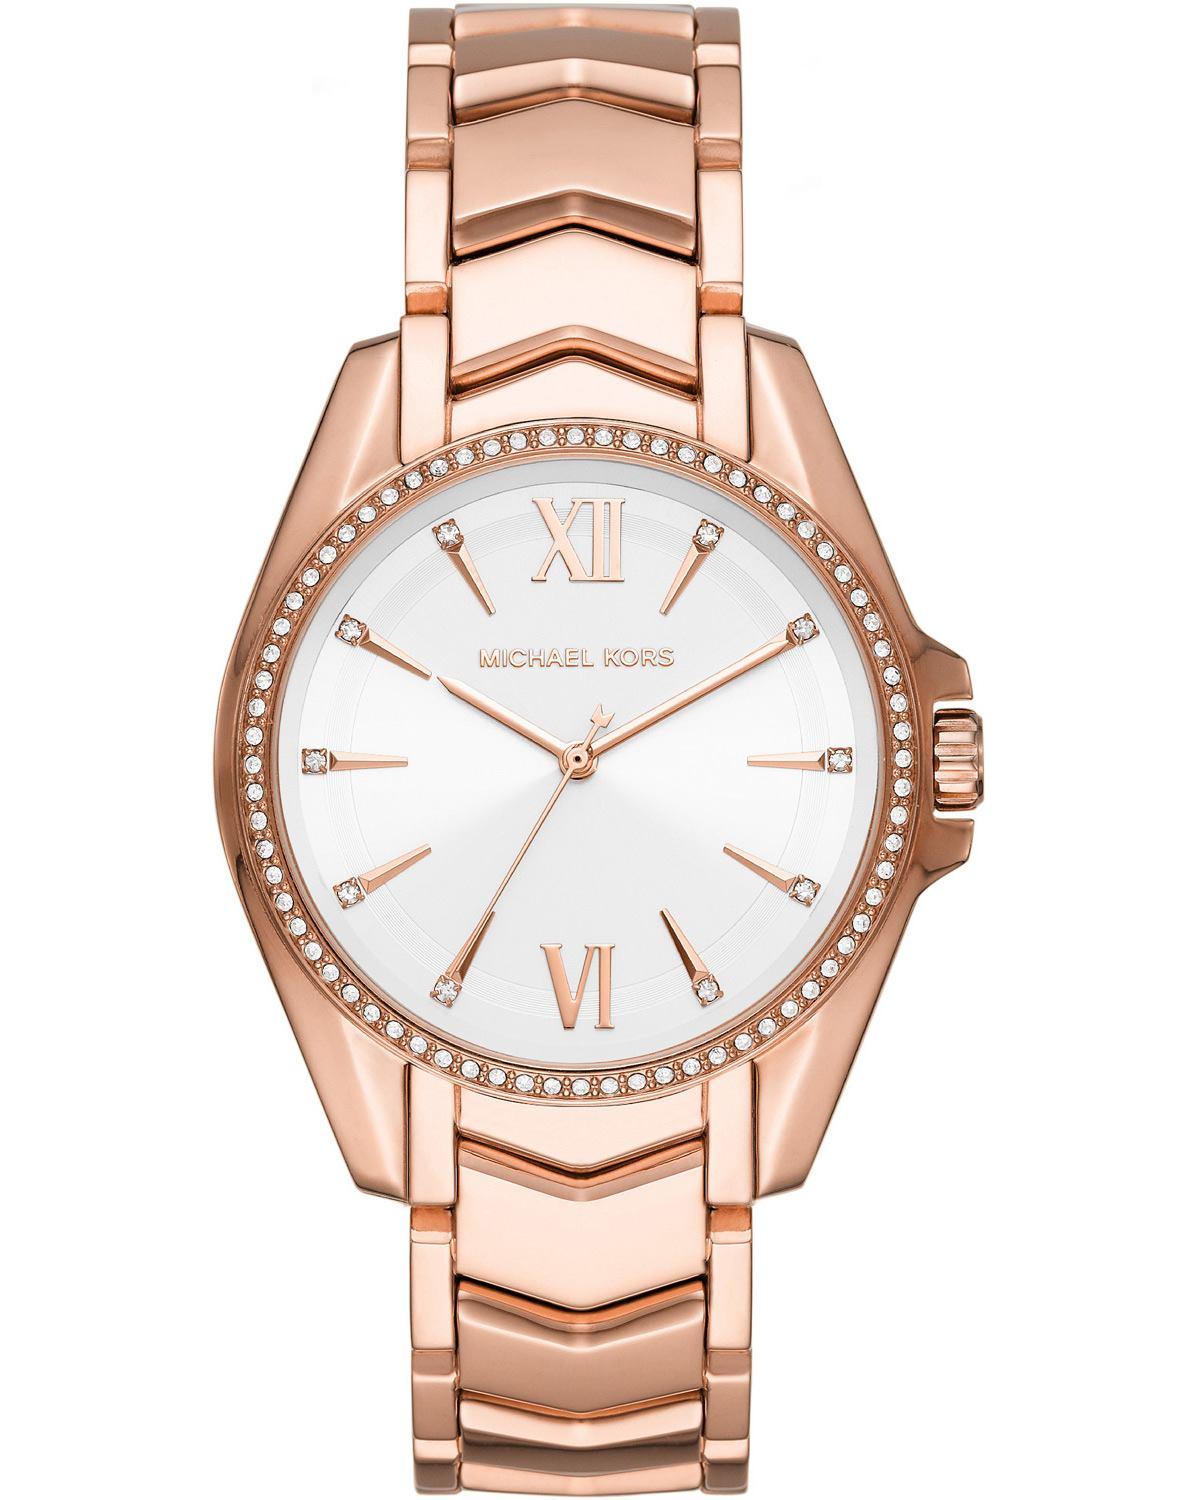 MICHAEL KORS Whitney Crystals - MK6694, Rose Gold case with Stainless Steel Bracelet